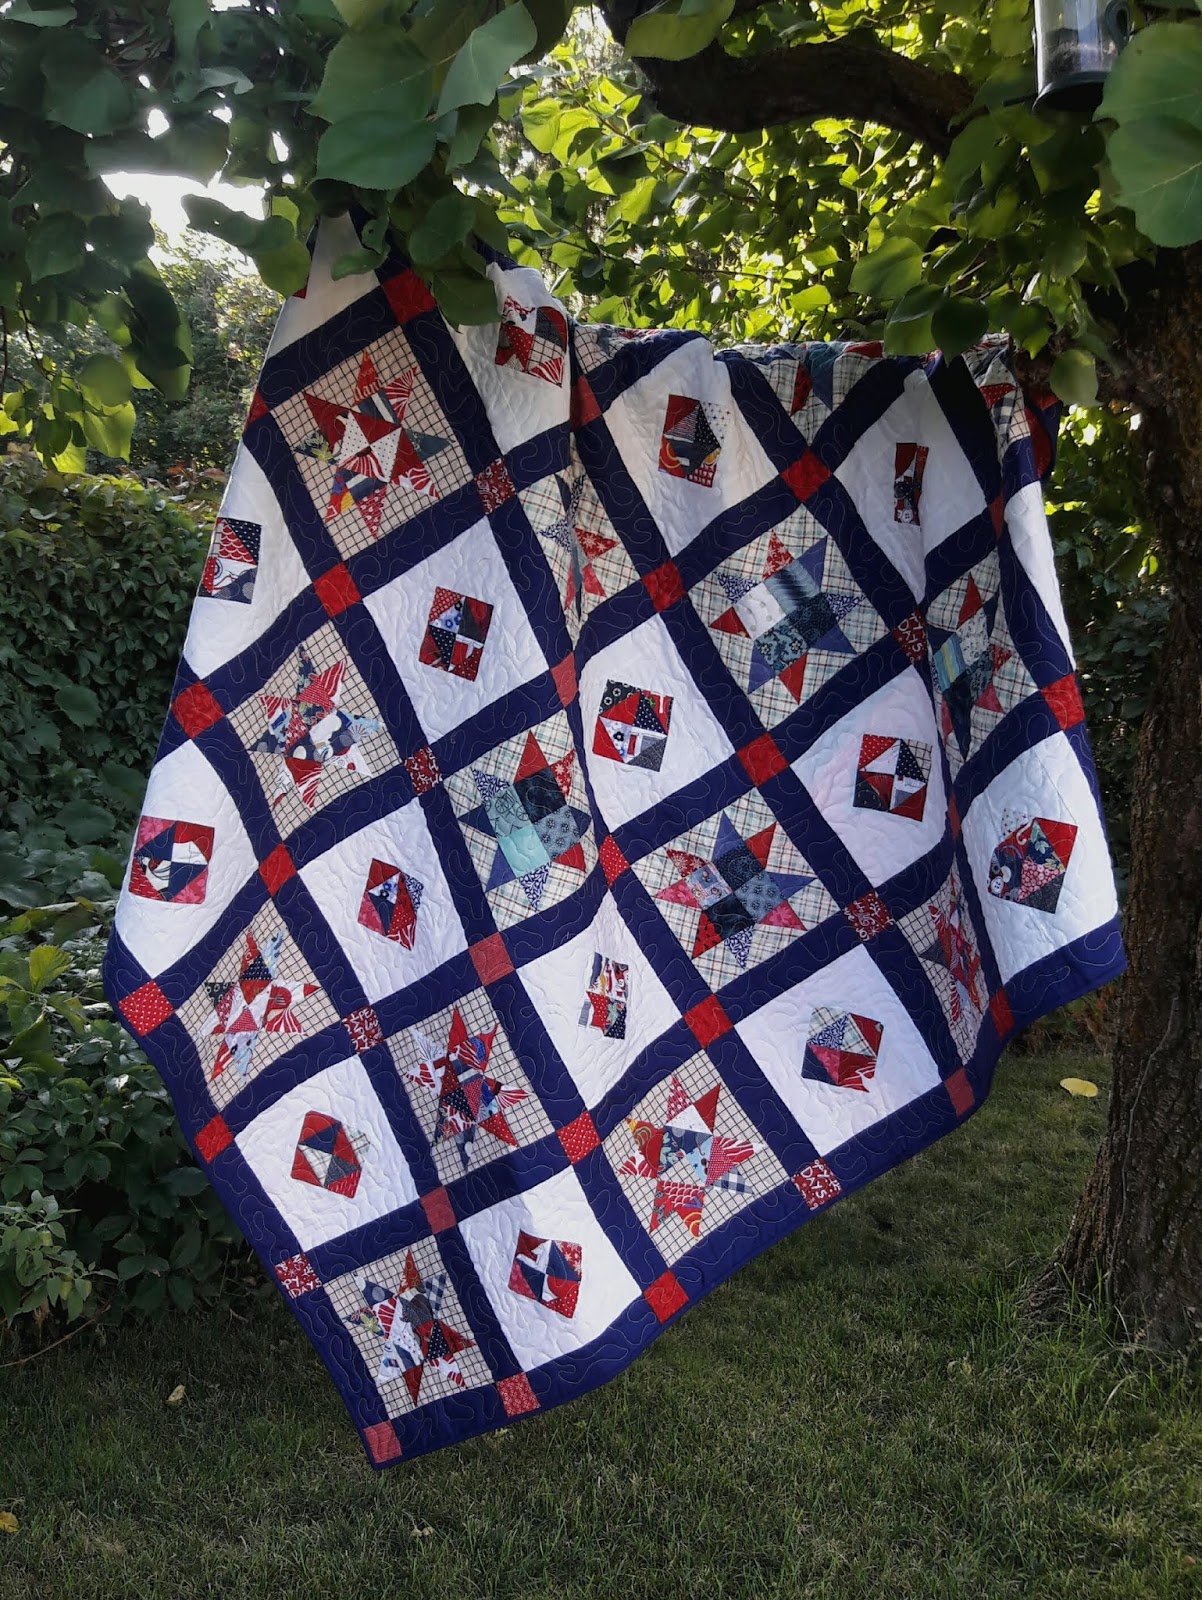 5 Small Scrap Friendly Sewing Projects to Make - Aunt Ems Quilts